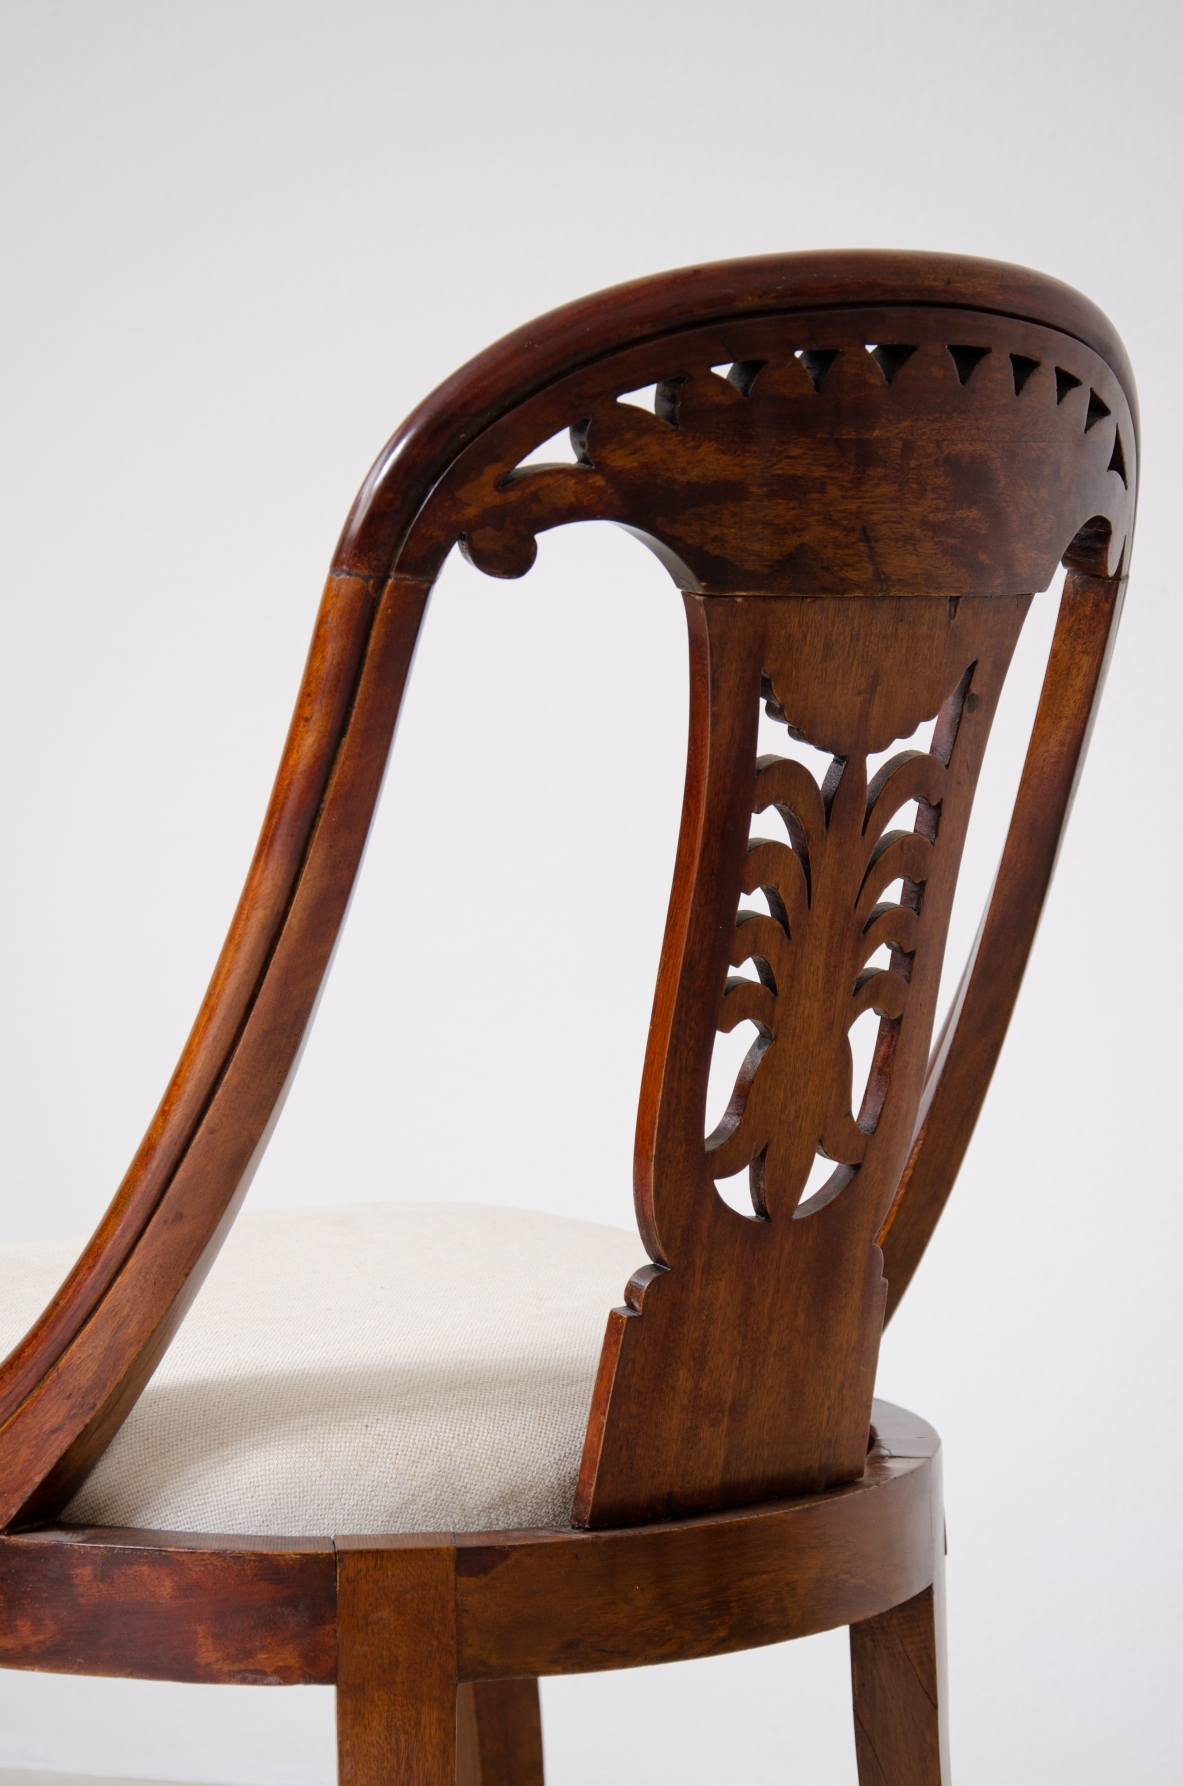 Rare set of 12 antique walnut cockpit chairs in walnut with carved back.  Charles X period,  Northern Italy, around 1830s.